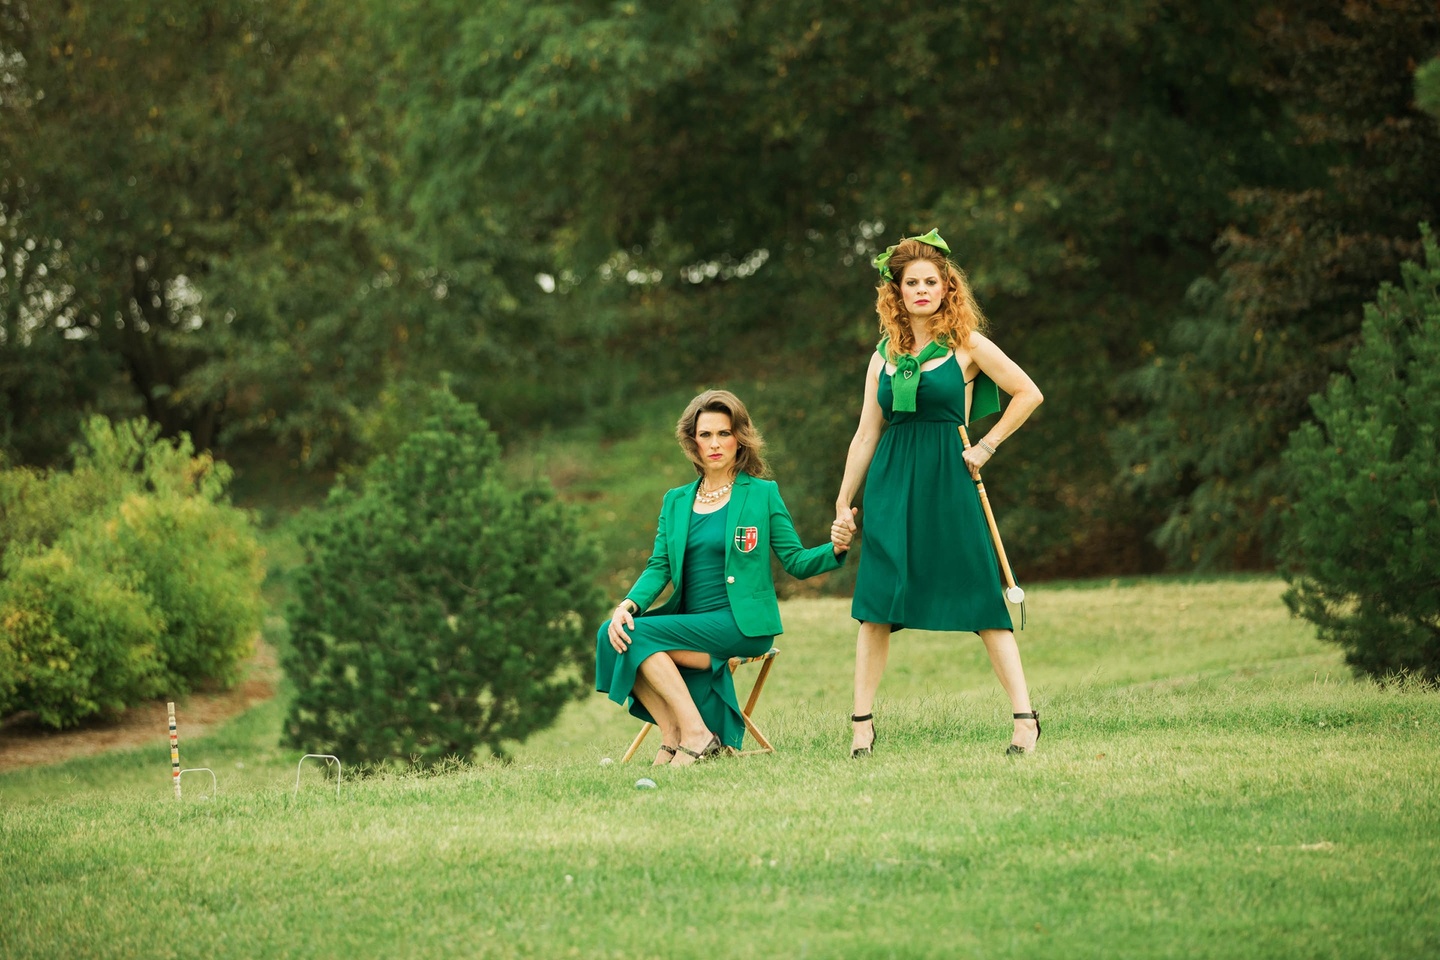 A photograph of two people, both in green dresses: the person to the left is seated on a chair, holding hands with the person to the right, who stands in a defiant pose, their left hand on their waist. Their outerwear is tied in a knot and draped on their shoulders. Both people look directly at the camera. In the background, a grassy green field and more bushes and trees beyond.